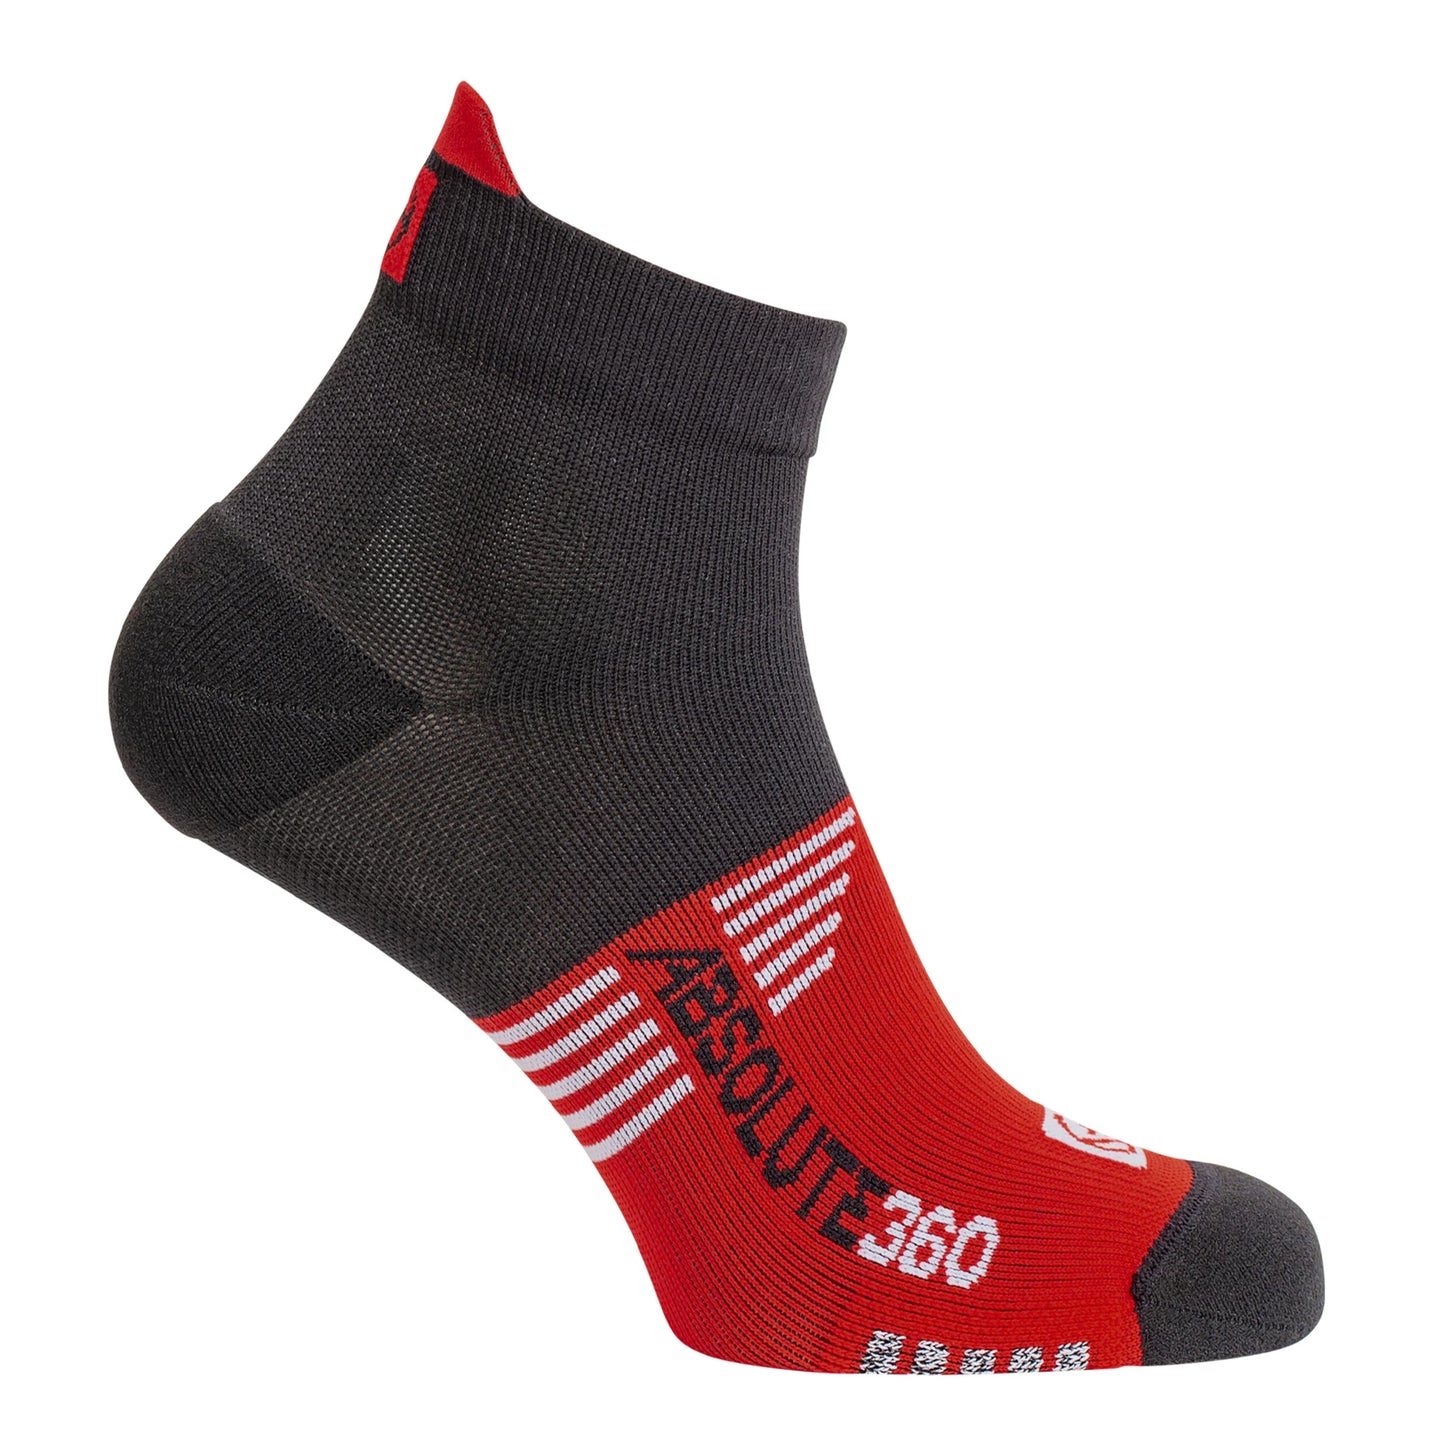 Absolute 360 Performance Socks (Blk/Red)